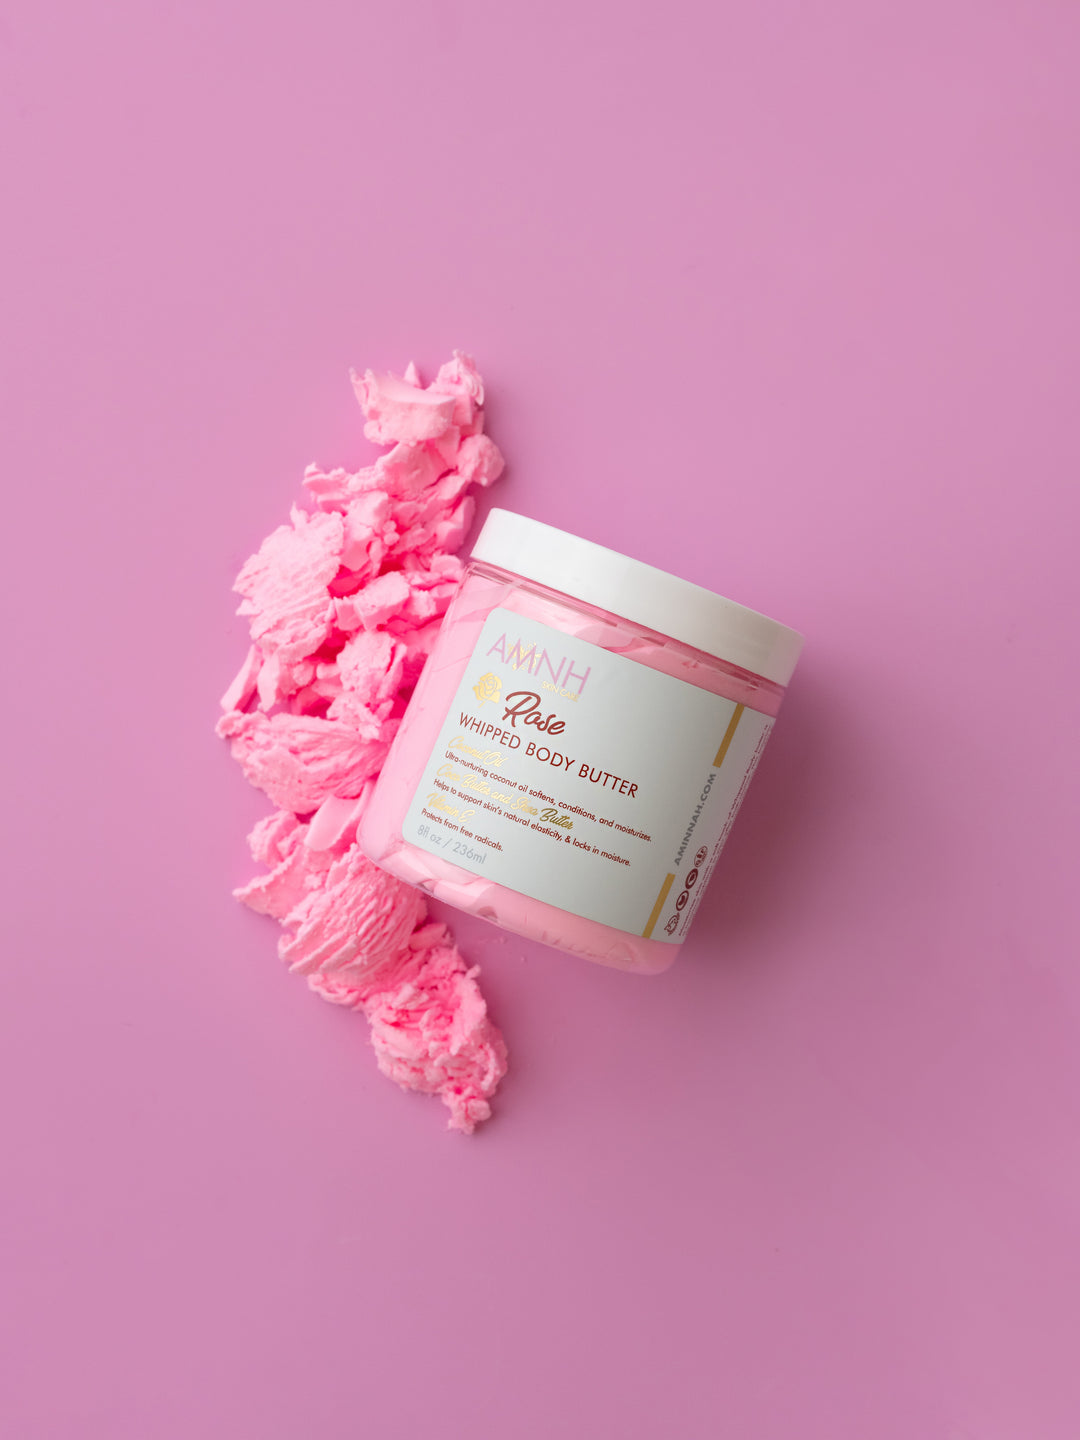 "Rose" Whipped Body Butter